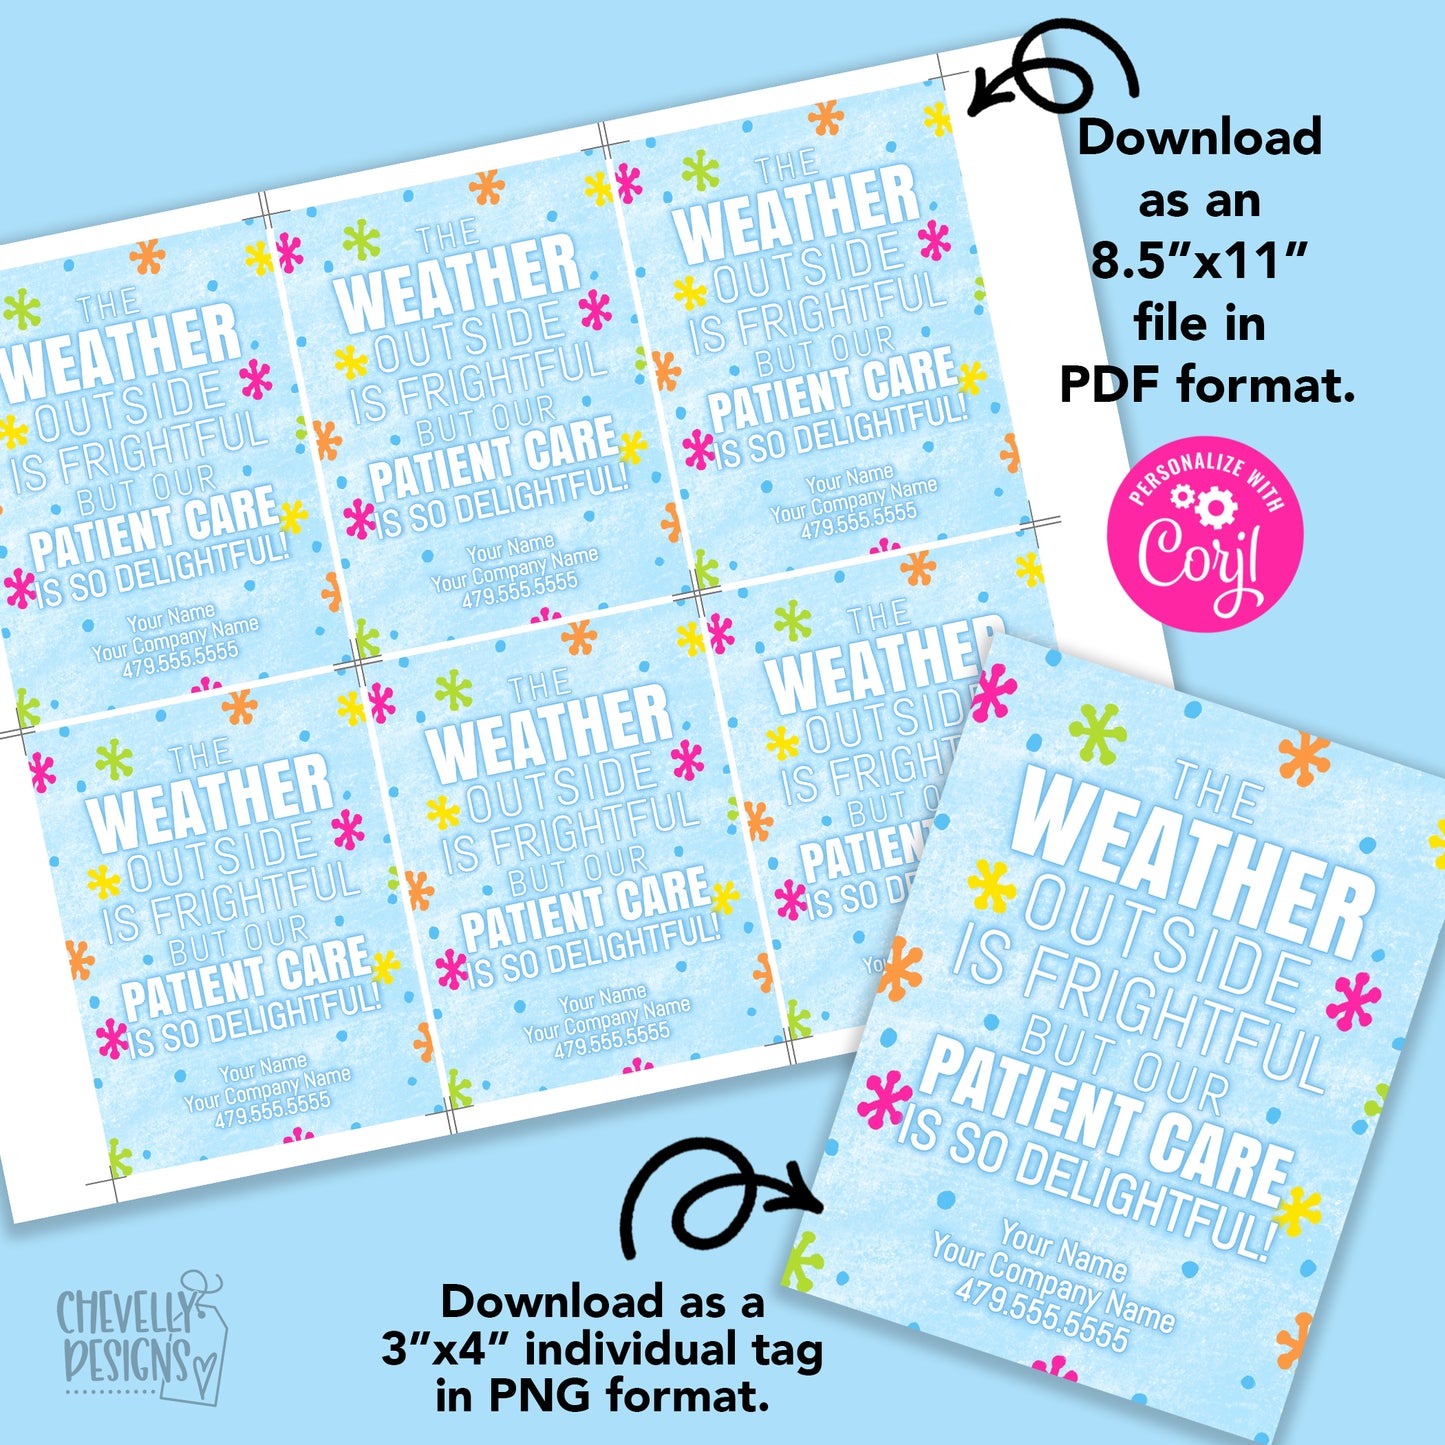 EDITABLE - Weather Outside is Frightful - Patient Care is Delightful - Christmas Business Referral Gift Tags - Printable Digital File